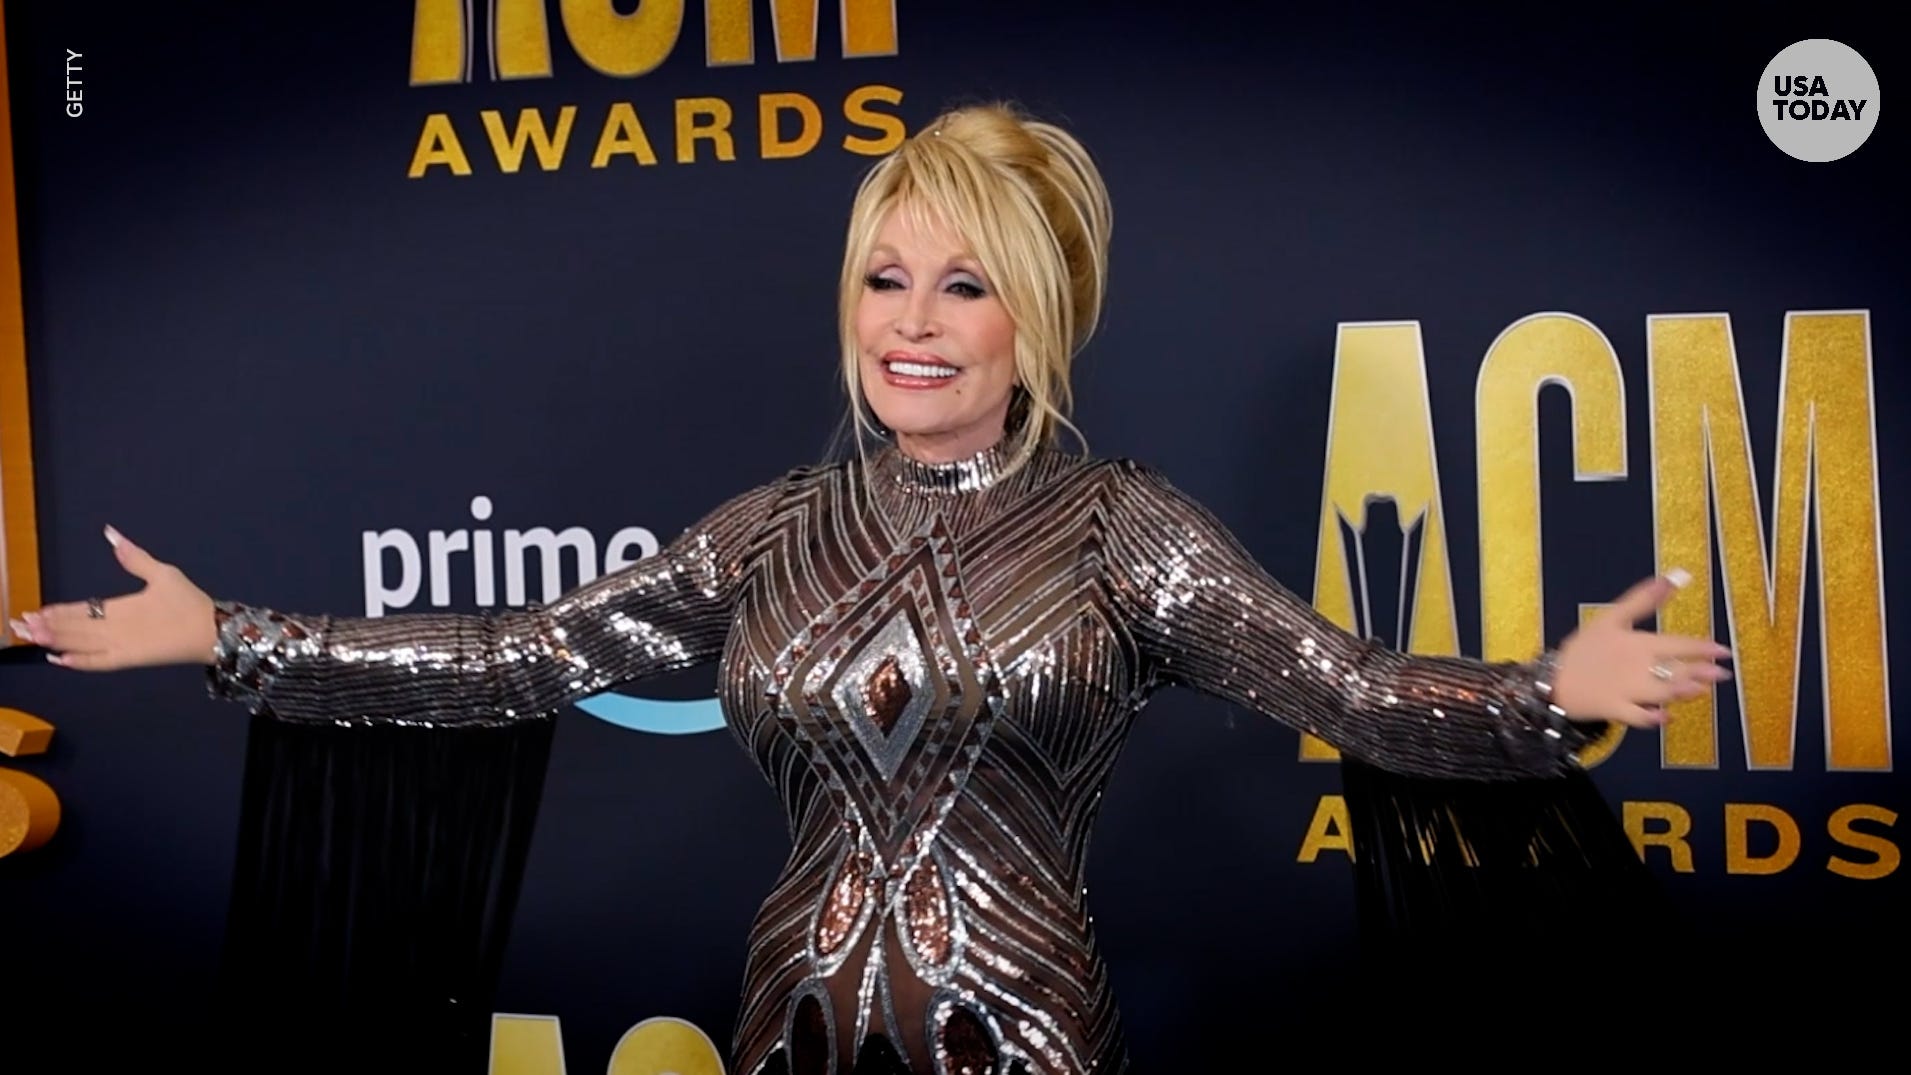 Dolly Parton stays on Rock Hall of Fame ballot for voters to decide